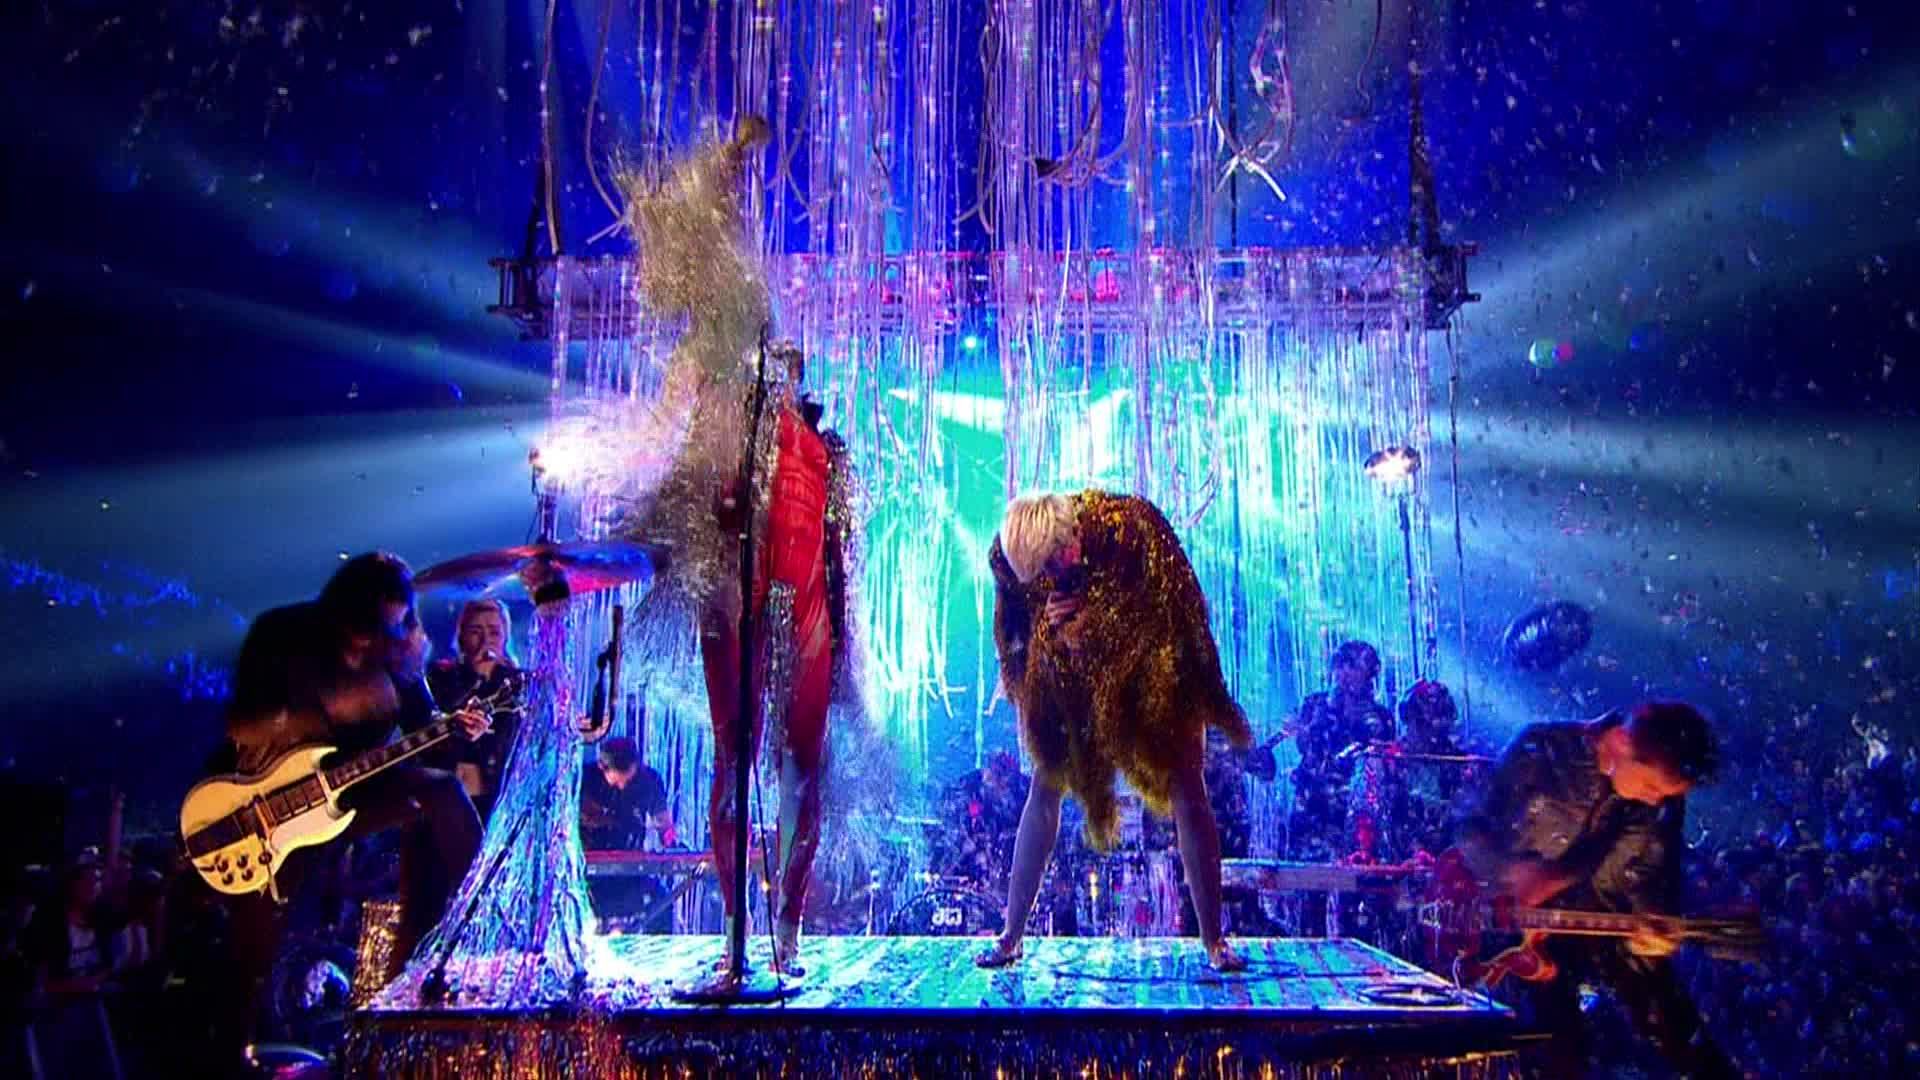 Miley Cyrus [ft The Flaming Lips] - 2014-05-18, Billboard Music Awards - 1080 TS - LSD preview 9